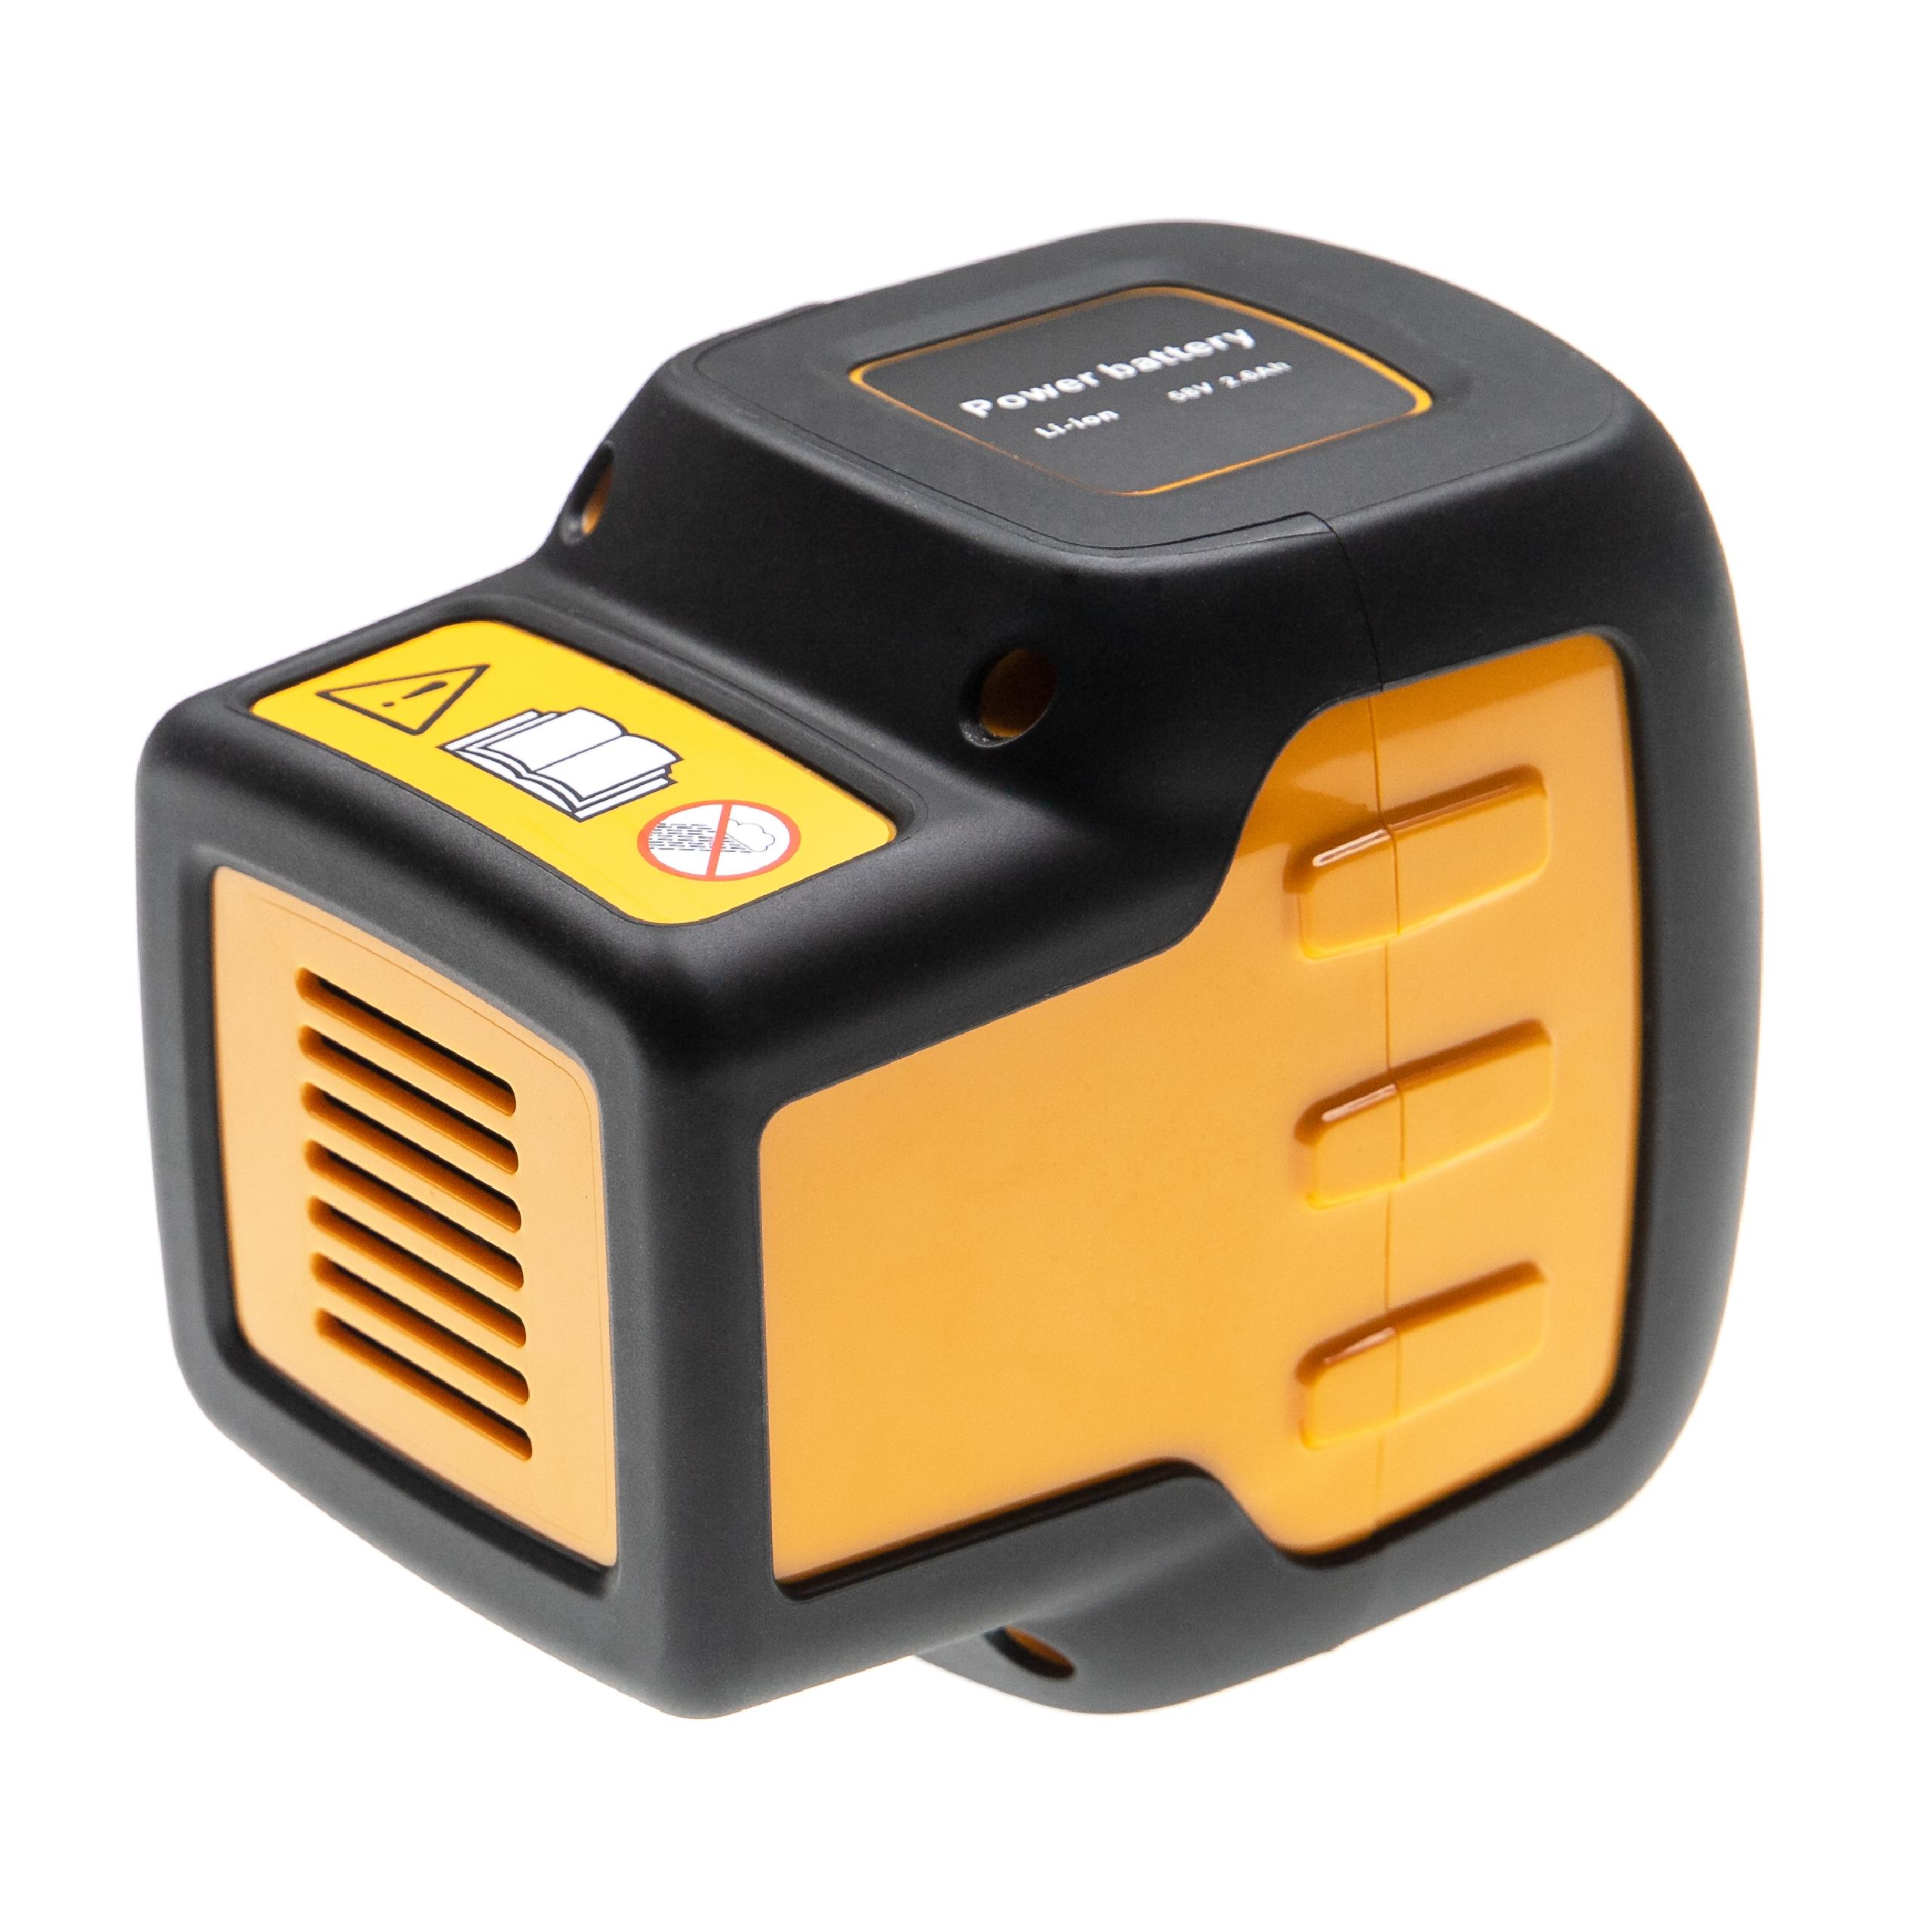 Electric Power Tool Battery Replaces McCulloch 59-09.238.03, 582611701, 590810201 - 2600 mAh, 58 V, Li-Ion